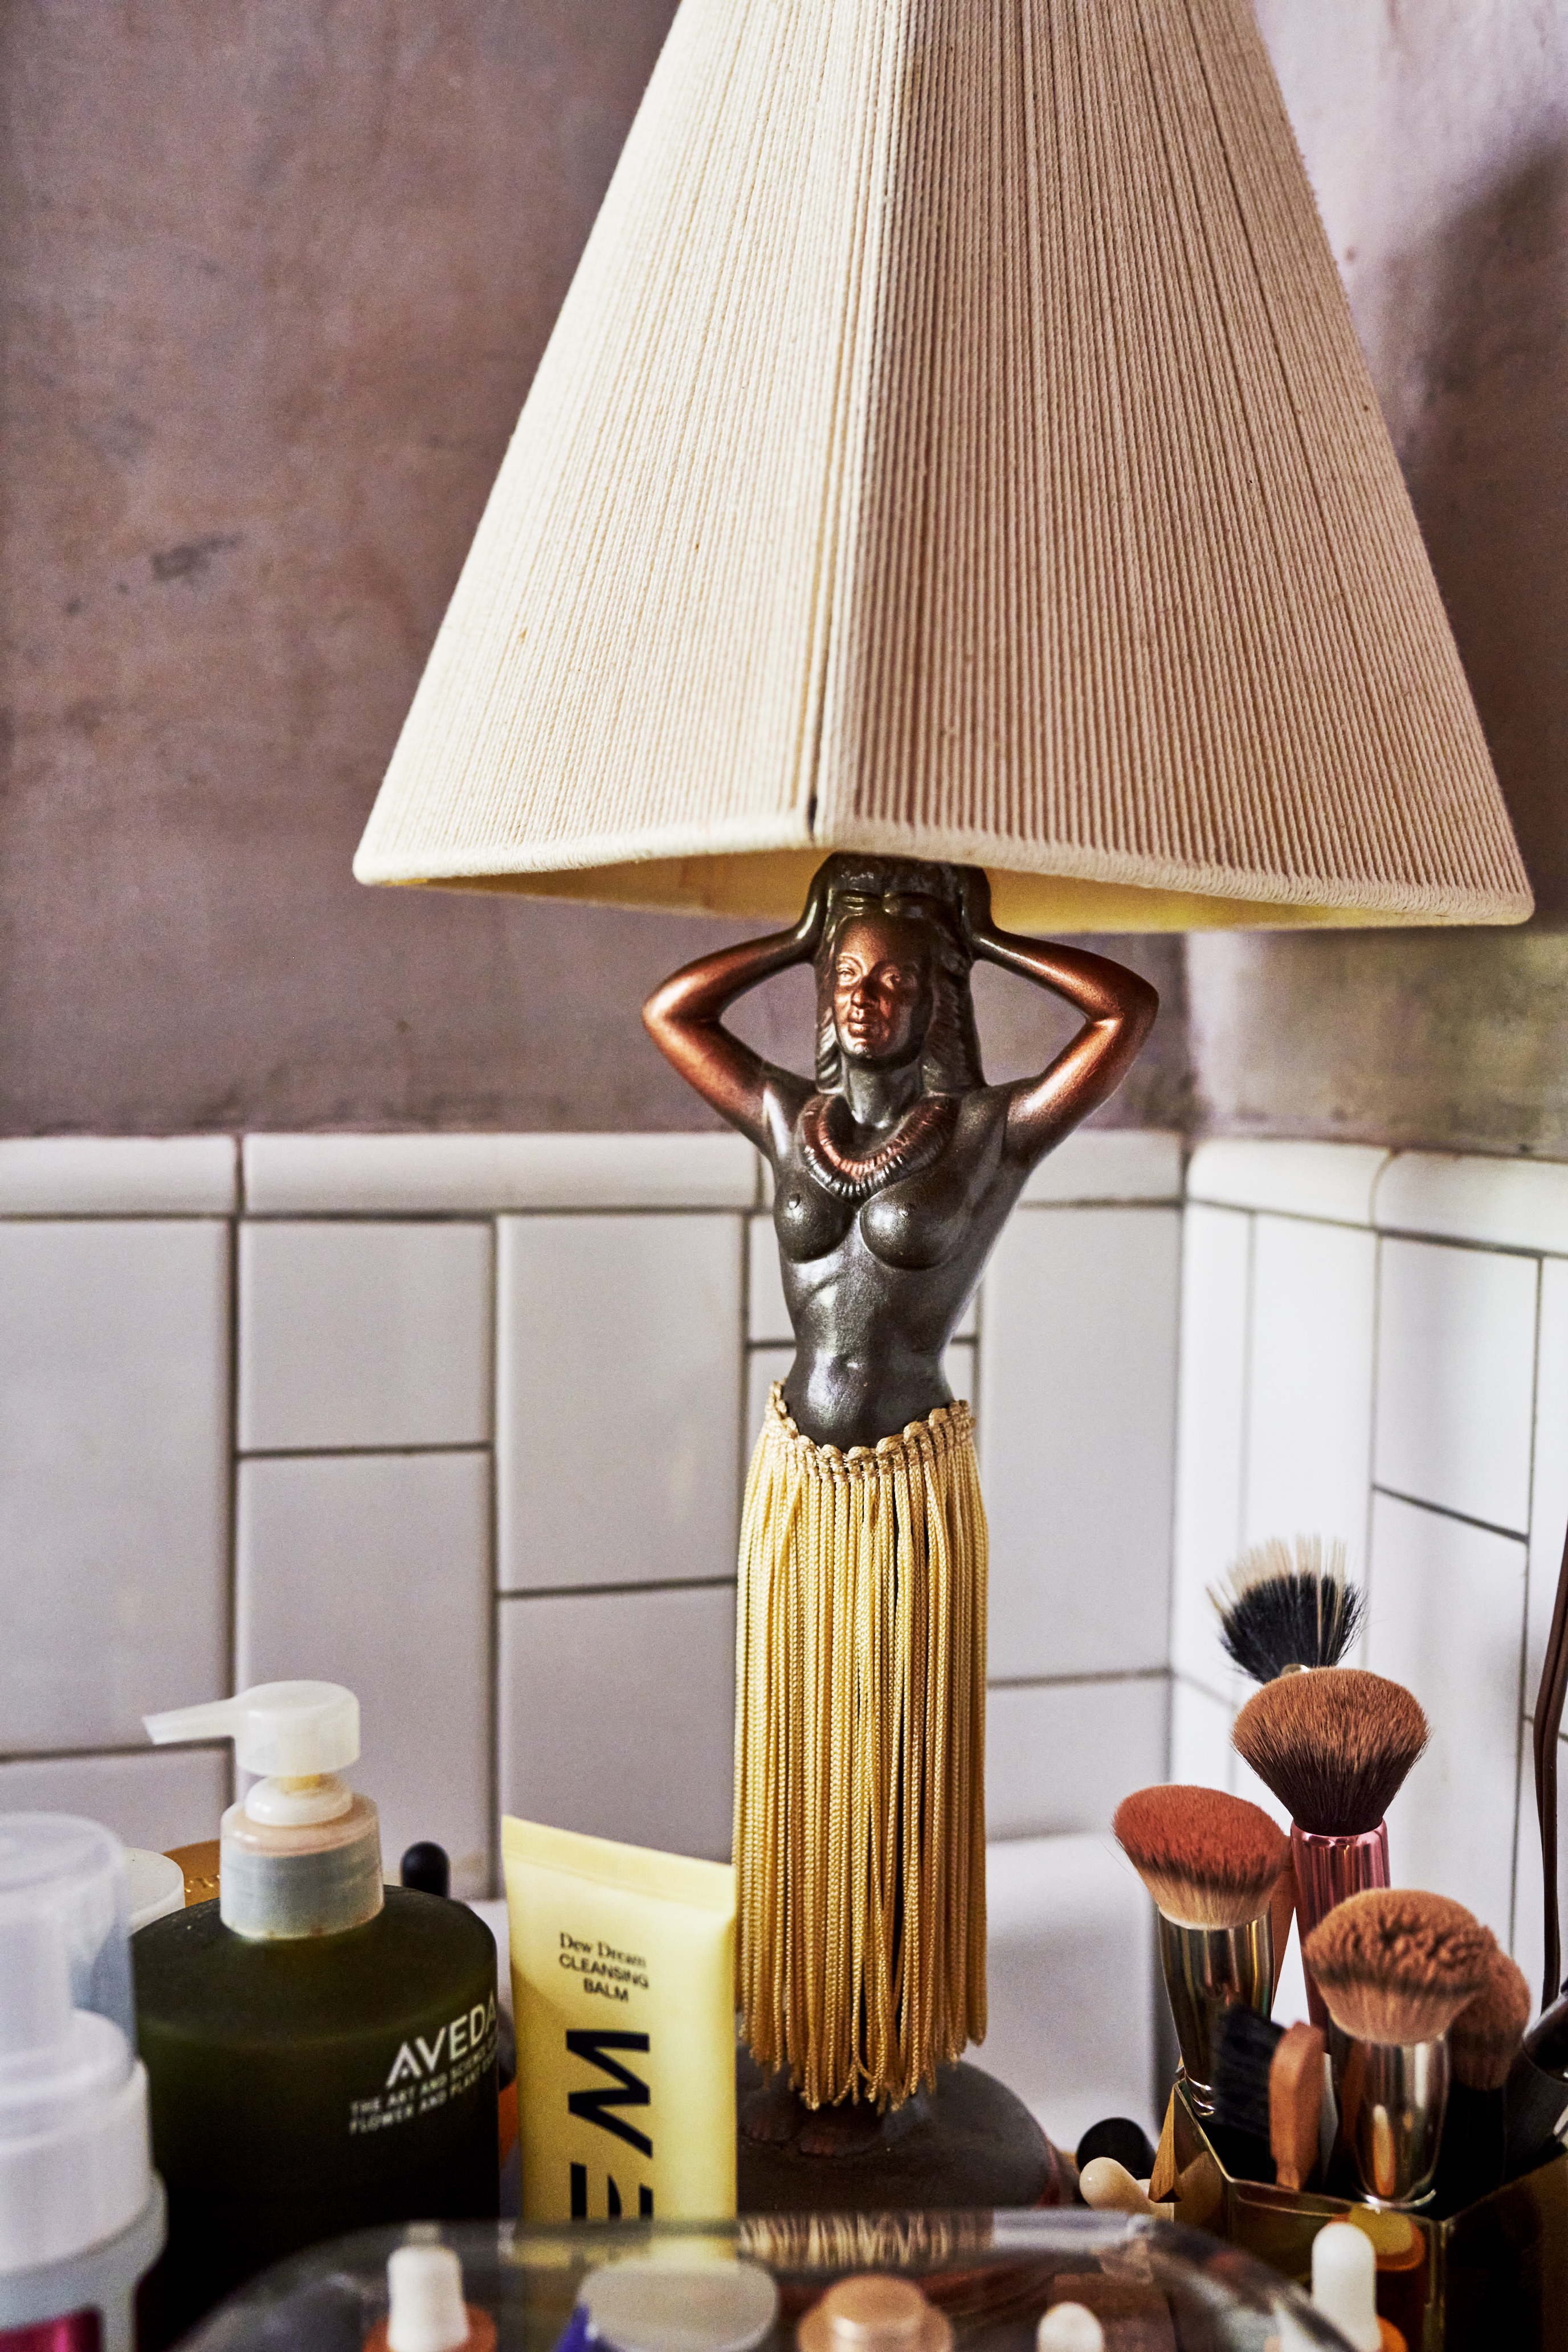 The image shows a decorative lamp with a woman figure base, fringed skirt, cream lampshade, surrounded by toiletries, makeup brushes, and beauty products. It has a tiled wall background.